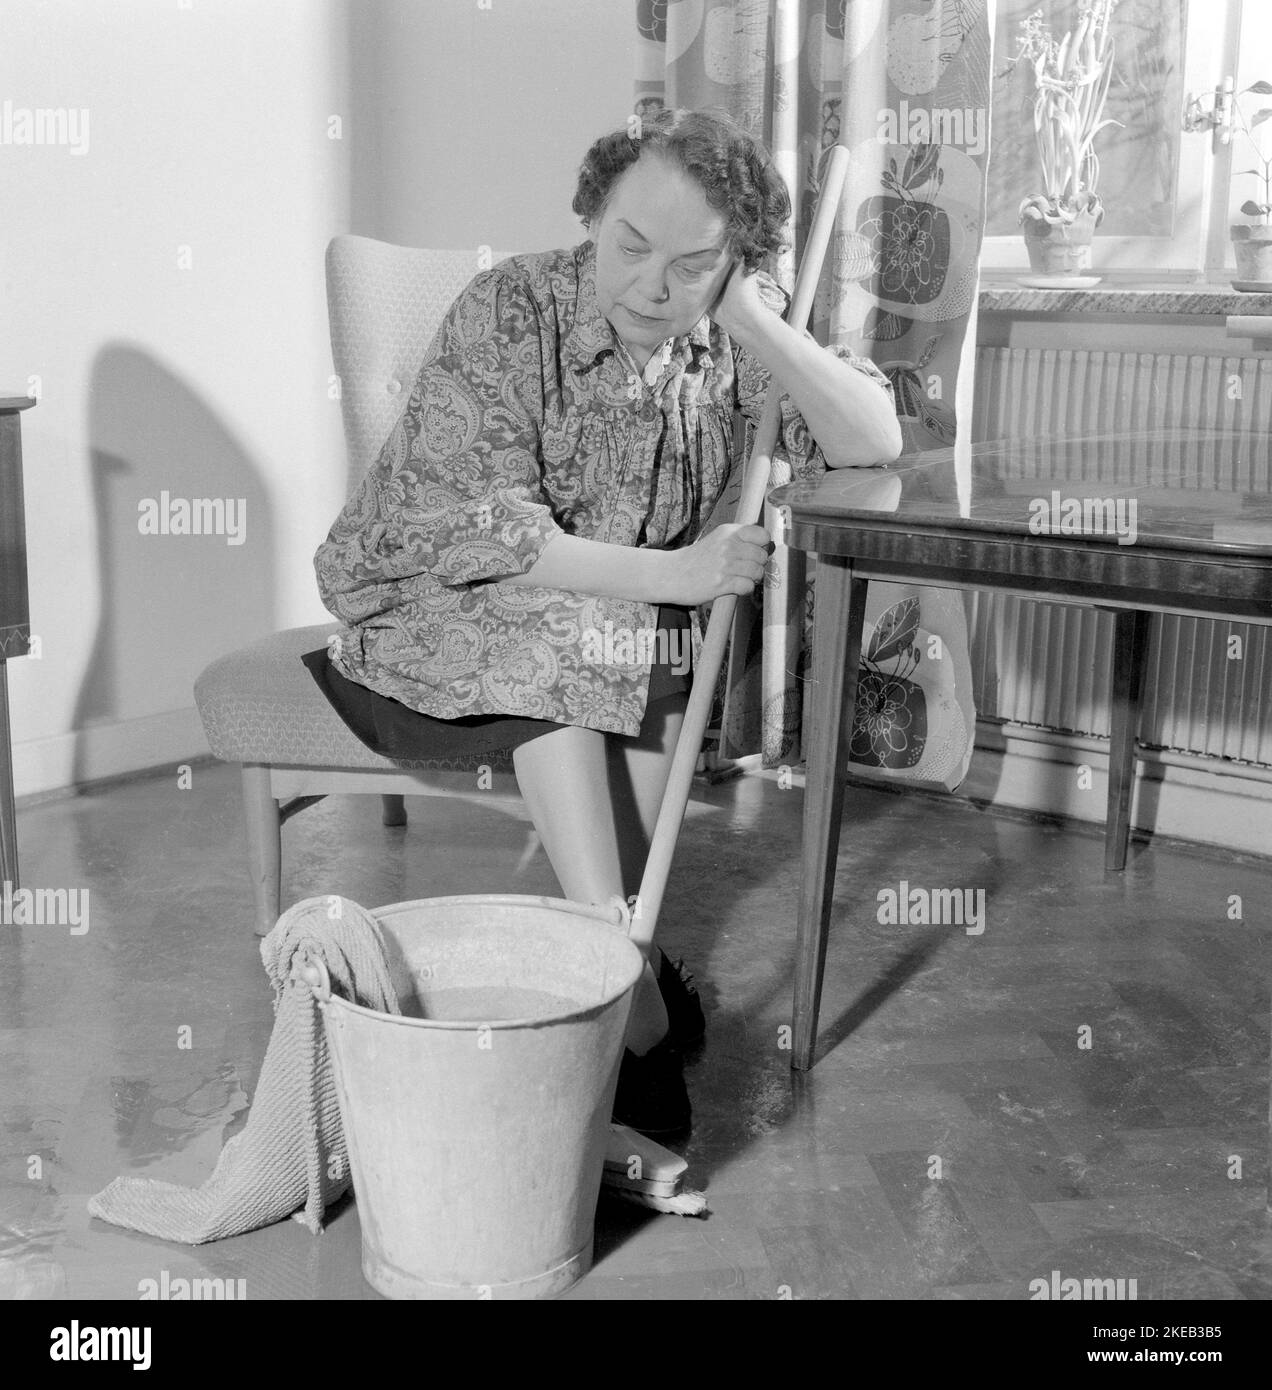 Cleaning the floor back then. A woman looks very tired and worn out when sitting on a chair, having a rest in the work of cleaning the floors. Sweden 1956 Conard ref 3160 Stock Photo